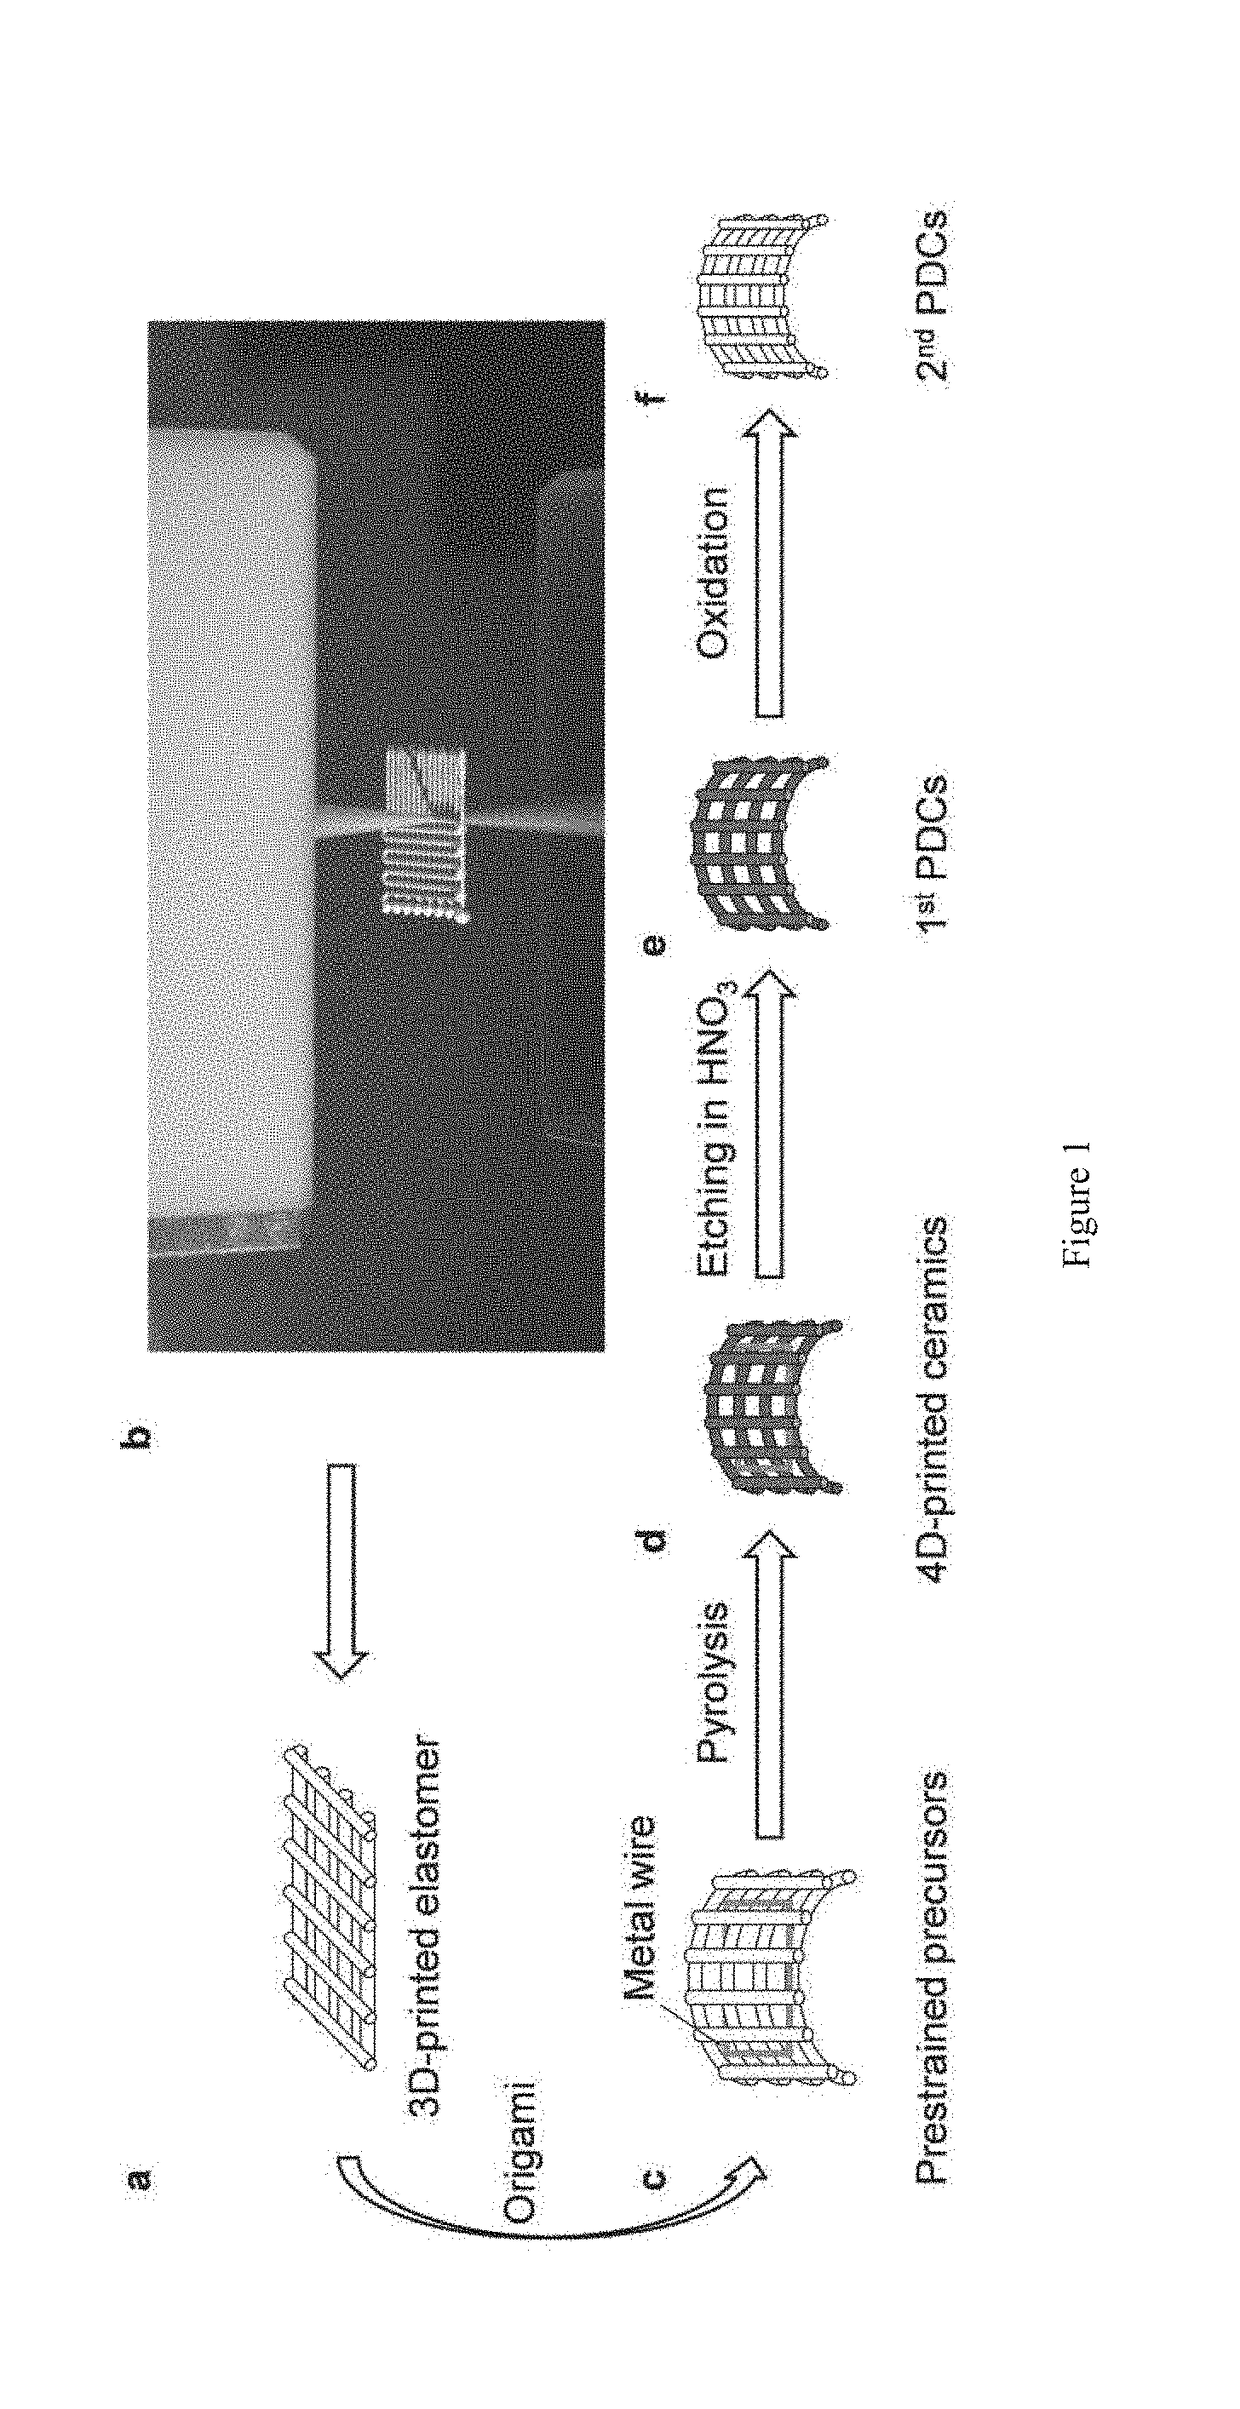 System and method for four-dimensional printing of ceramic origami structures